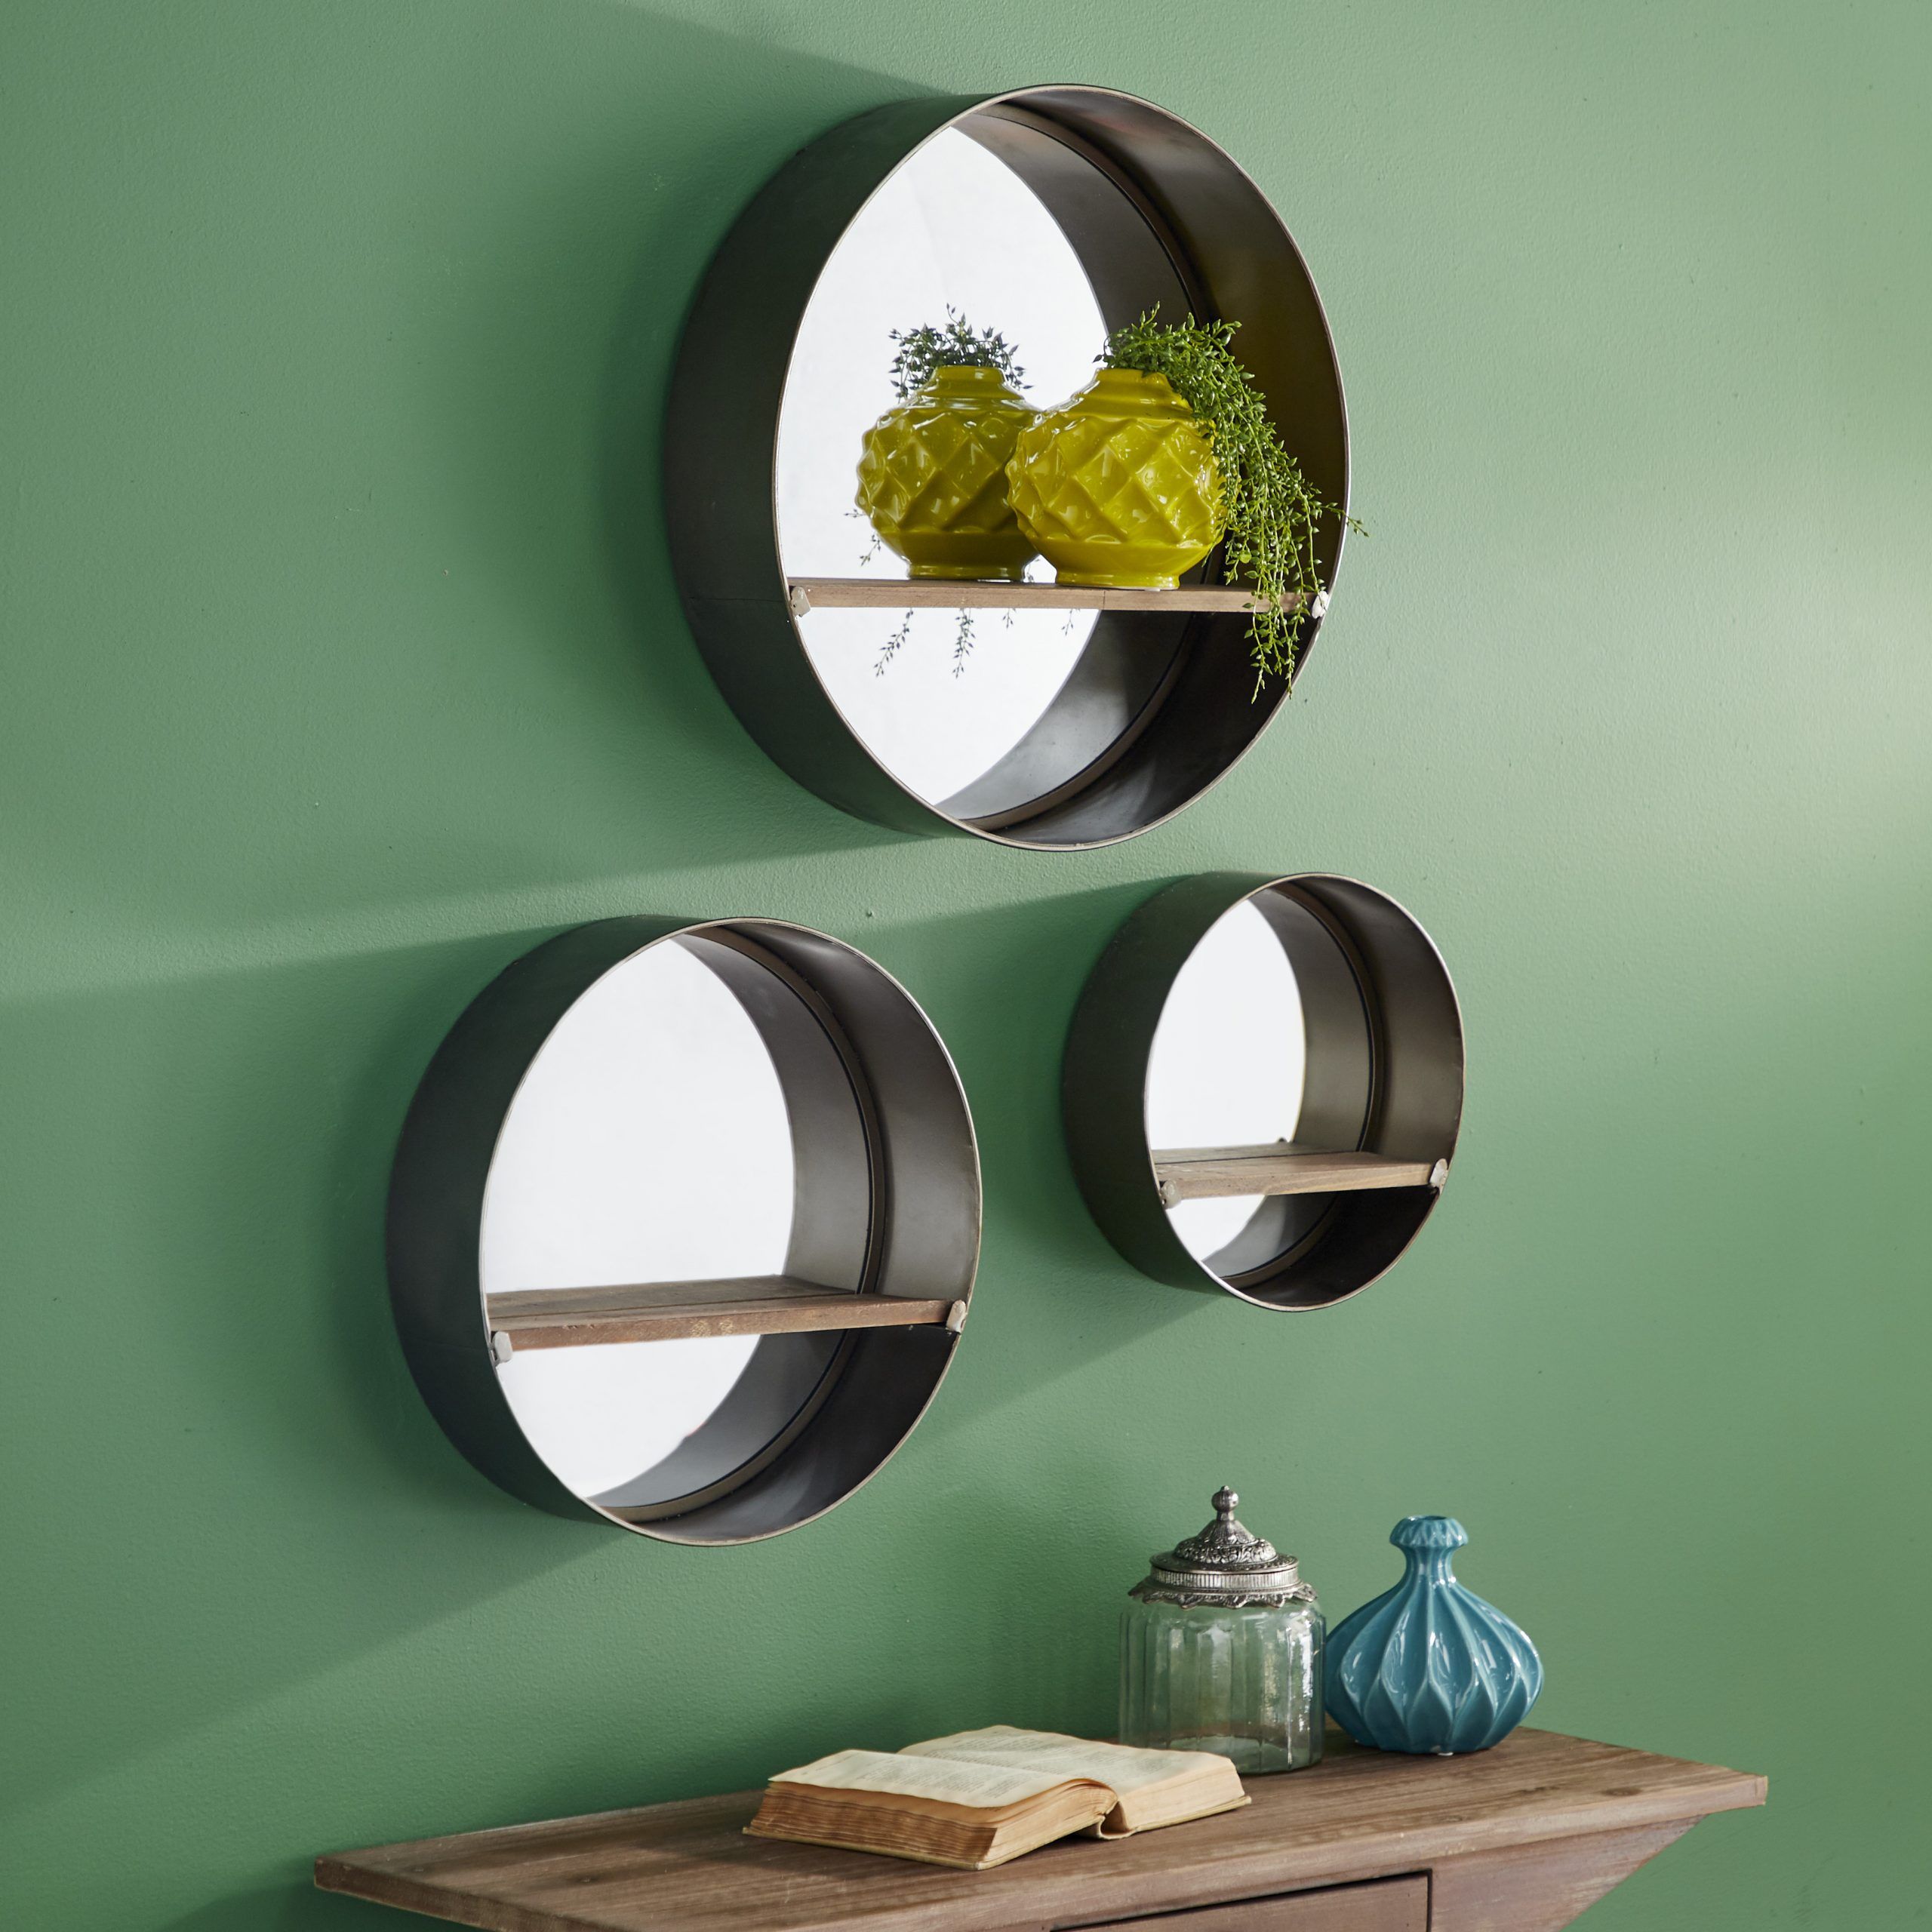 Decmode Large, Round Silver Metal Wall Mirrors With Natural Wood Throughout Clear Wall Mirrors (View 10 of 15)